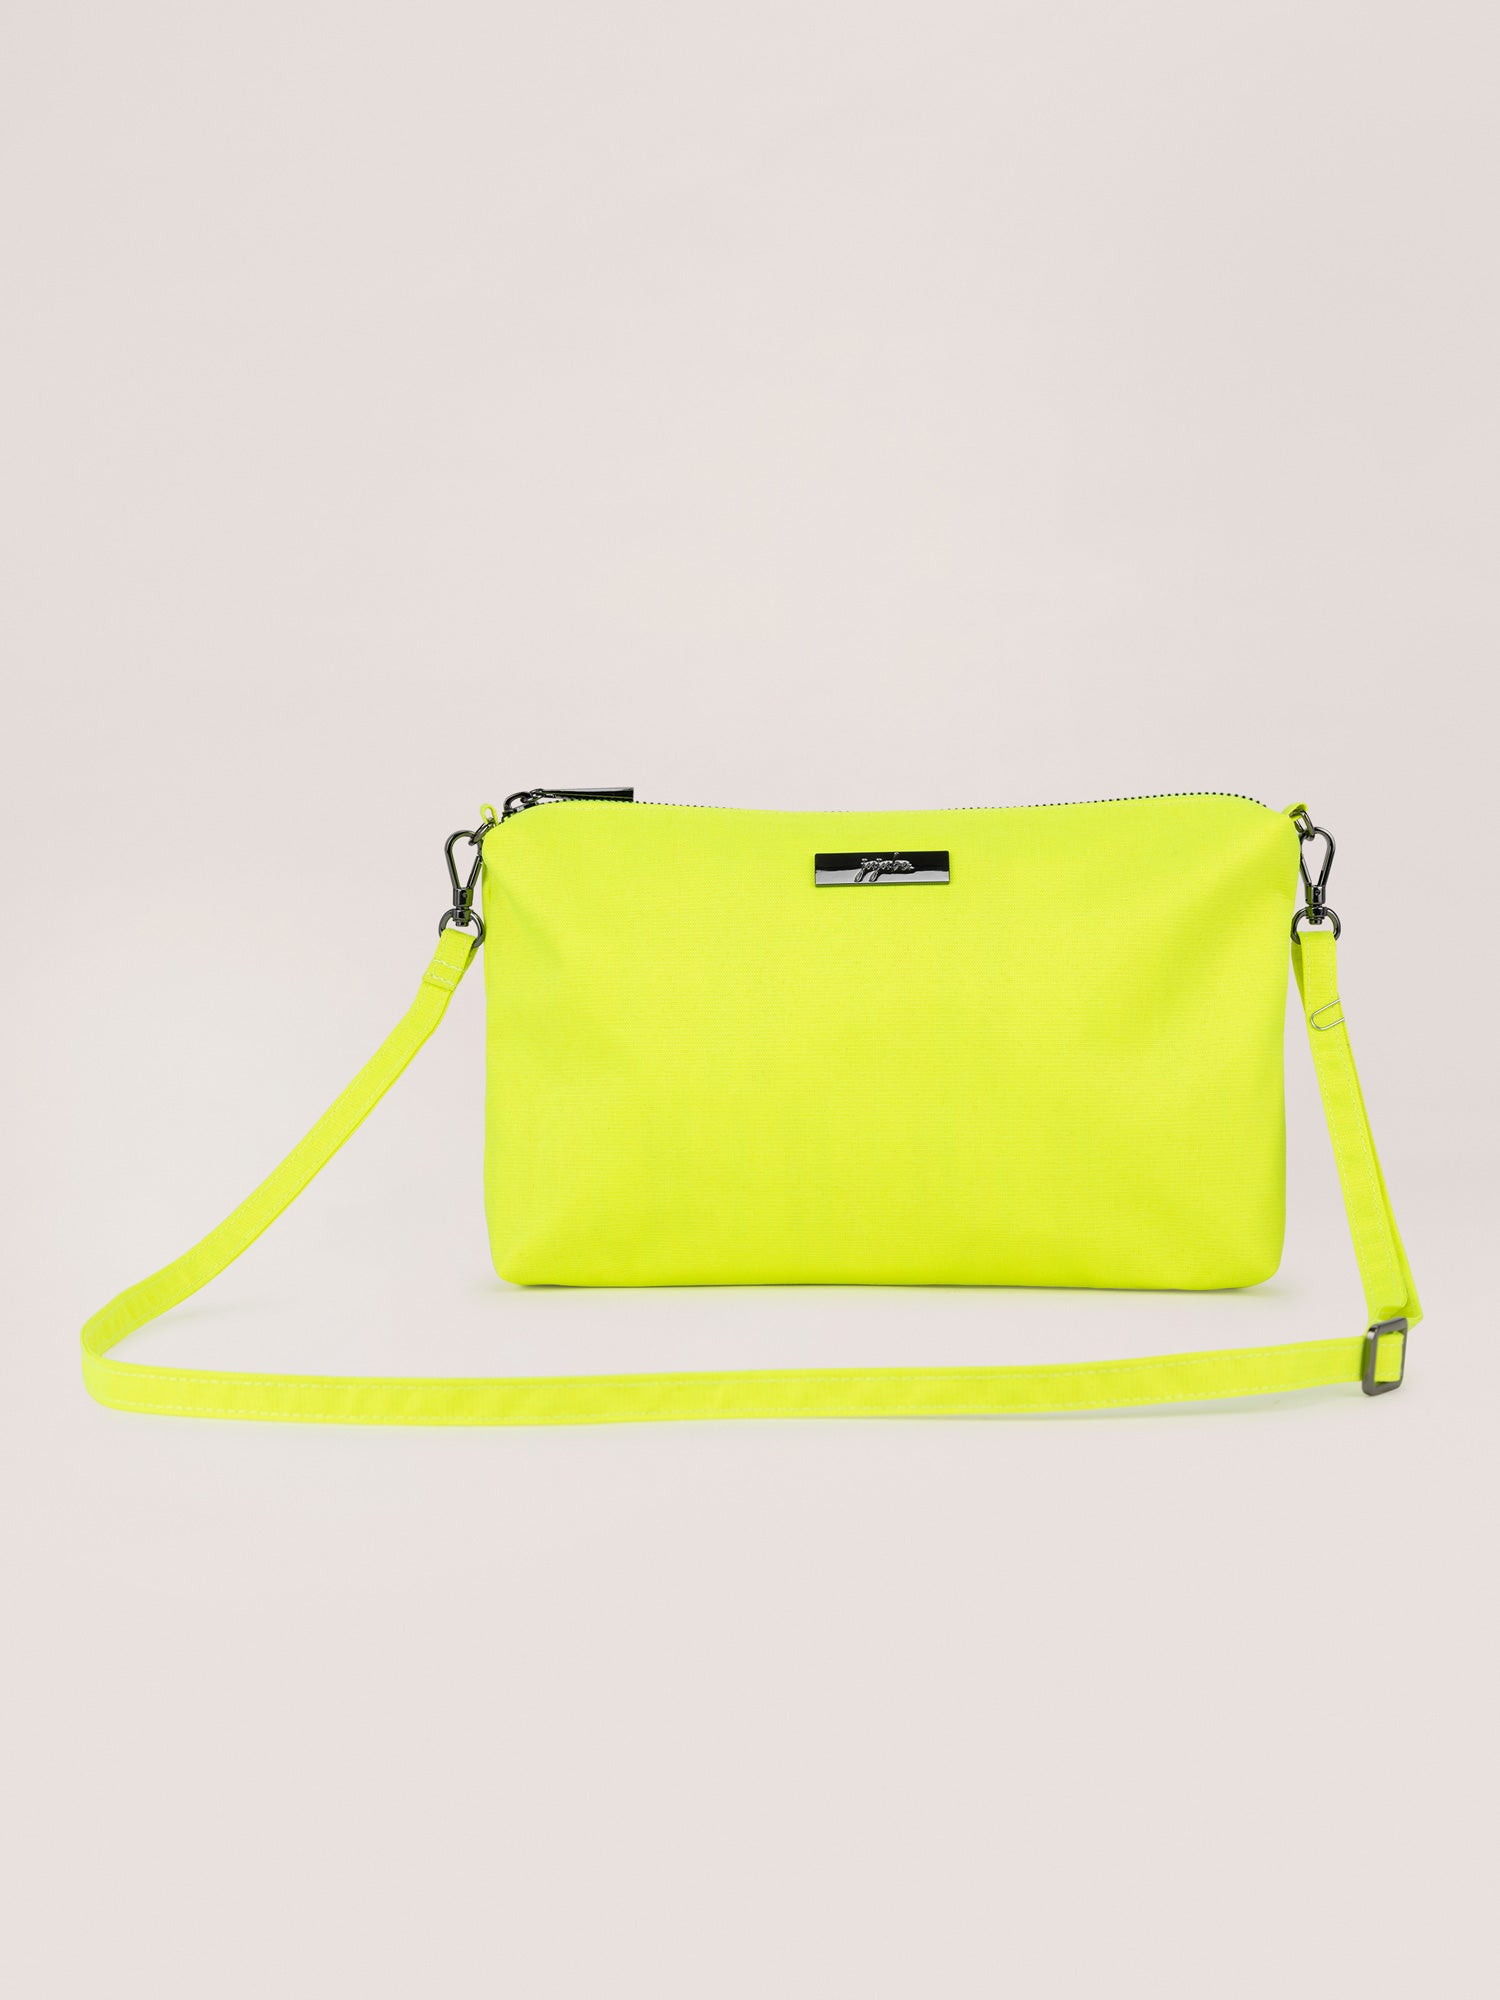 Neon Yellow Be Quick Crossbody Bag Front View